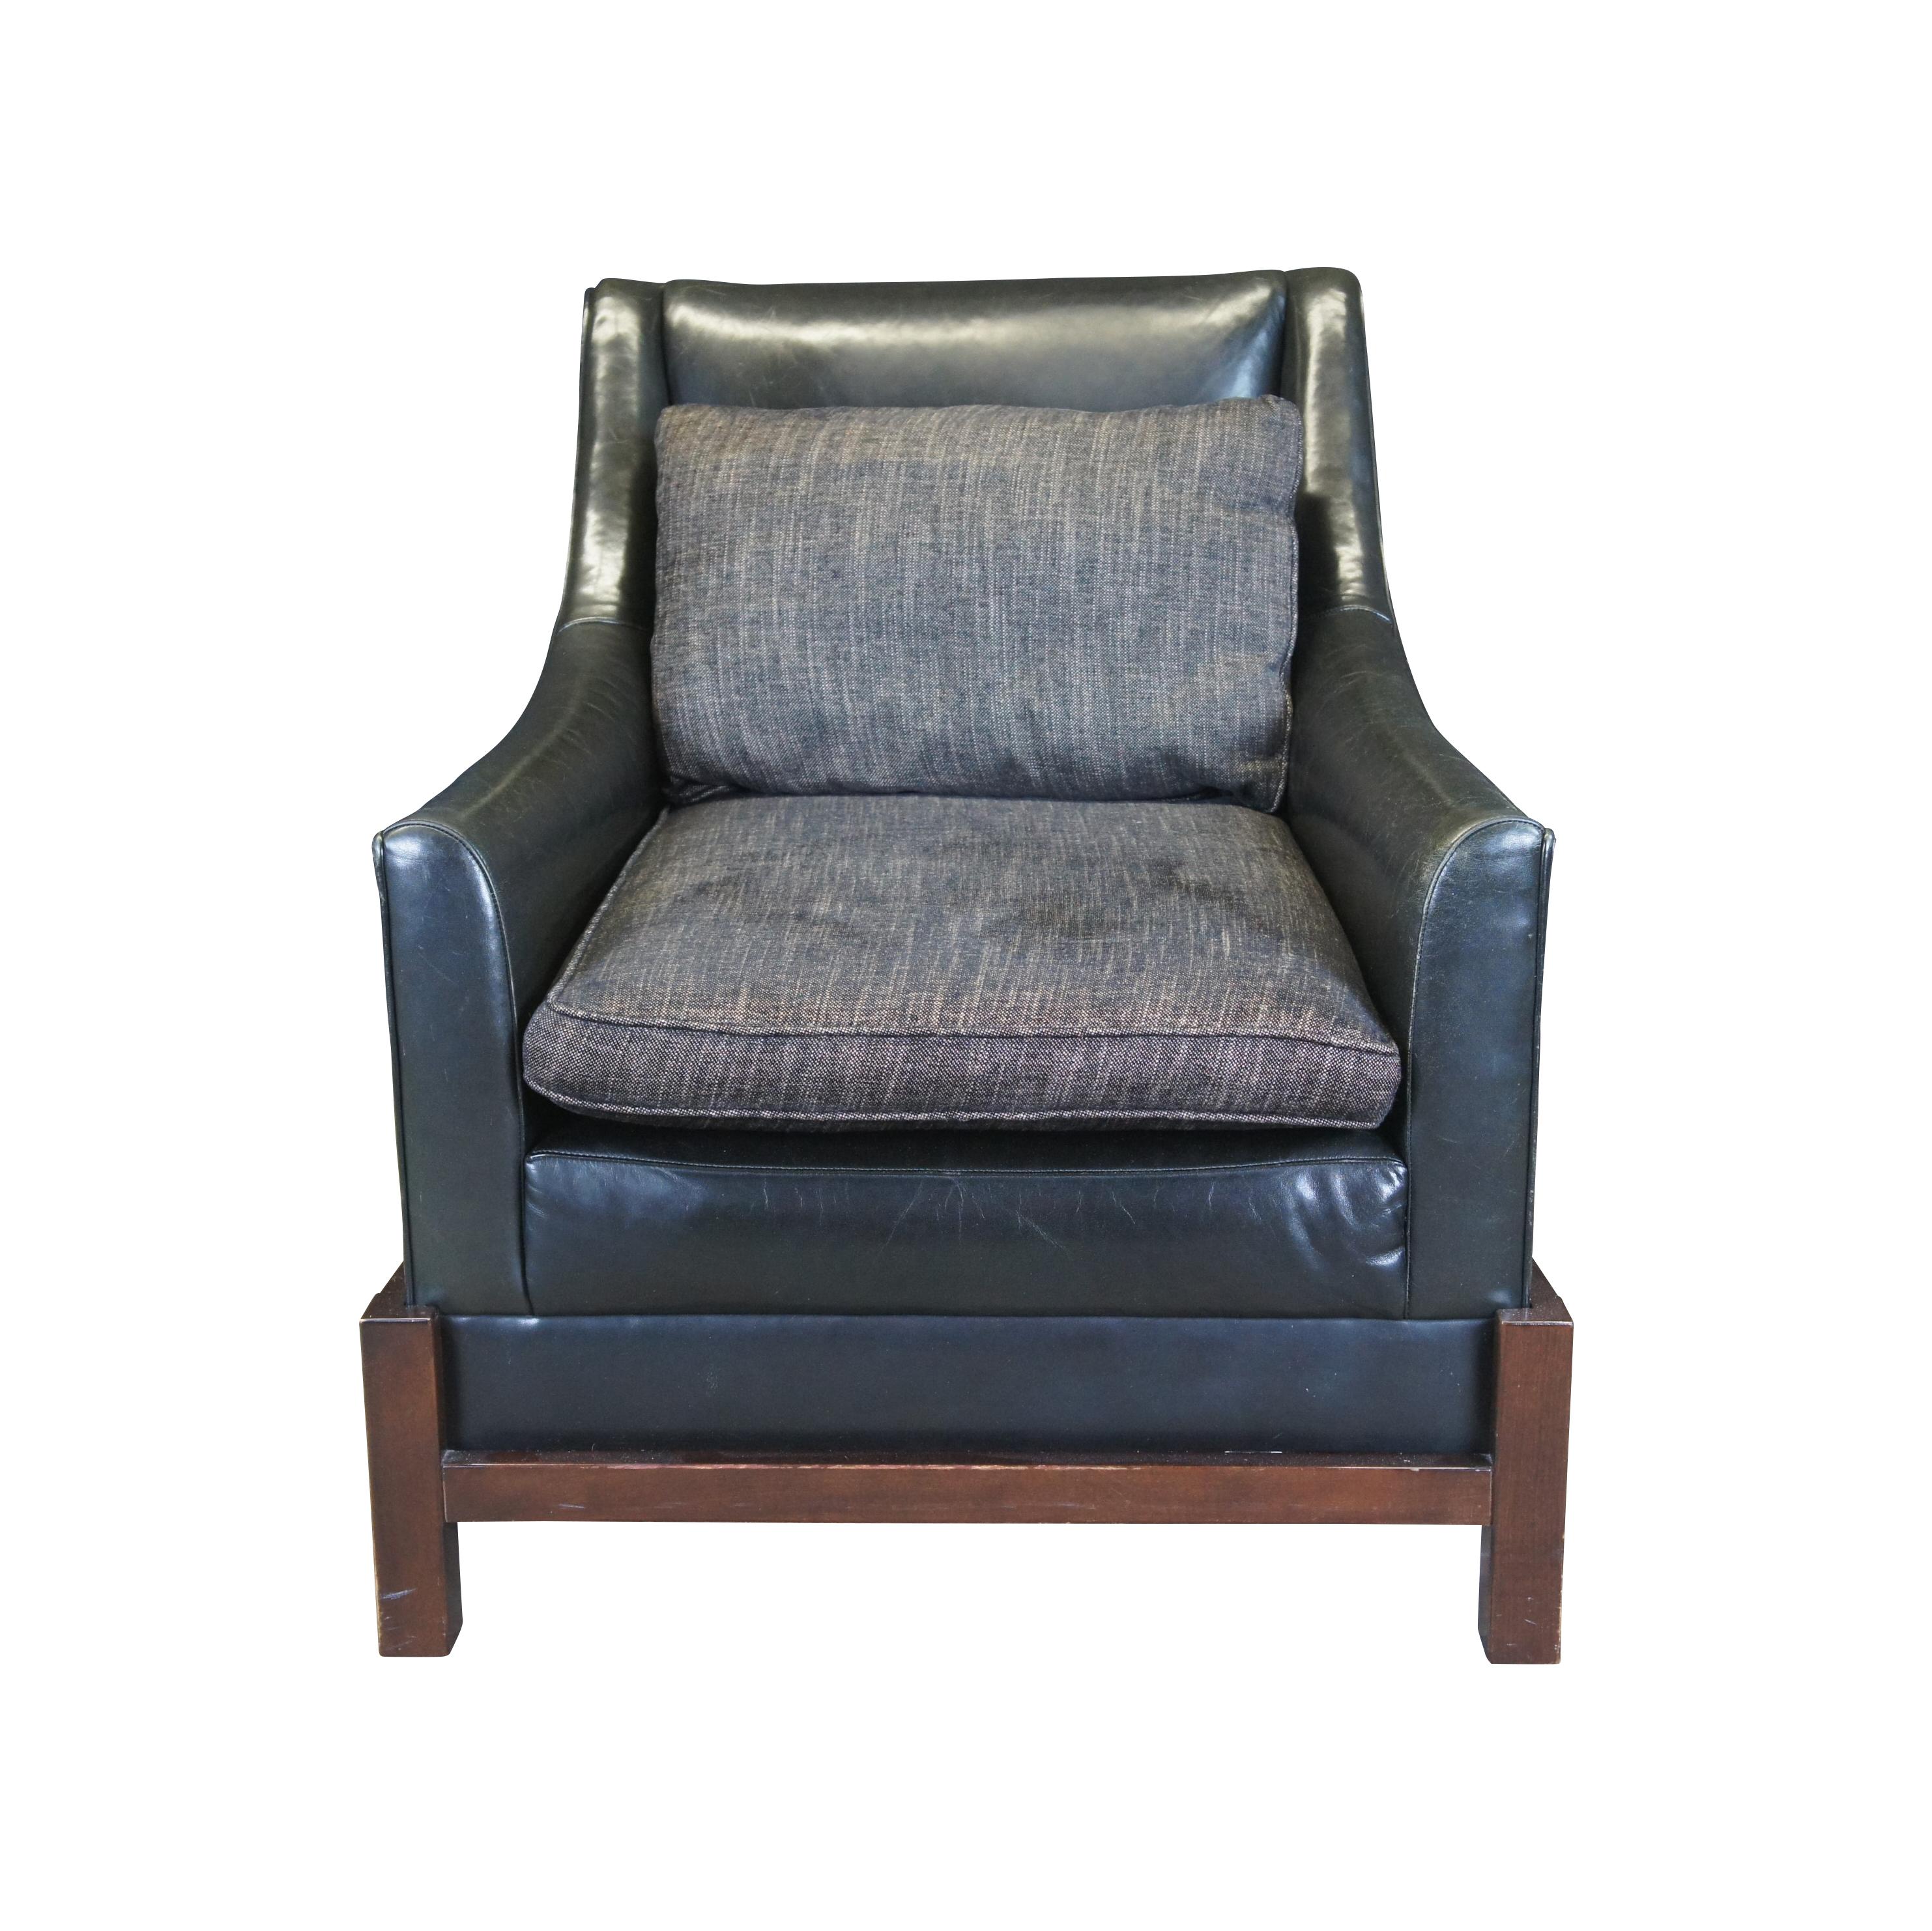 Laura Kirar for Baker Furniture Neue Library Club armchair. Features a black leather frame with swoop arms on an espresso cradle. Features grey seat cushion and back rests. An elegant design that lends well in any modern setting.
DIMENSIONS
32